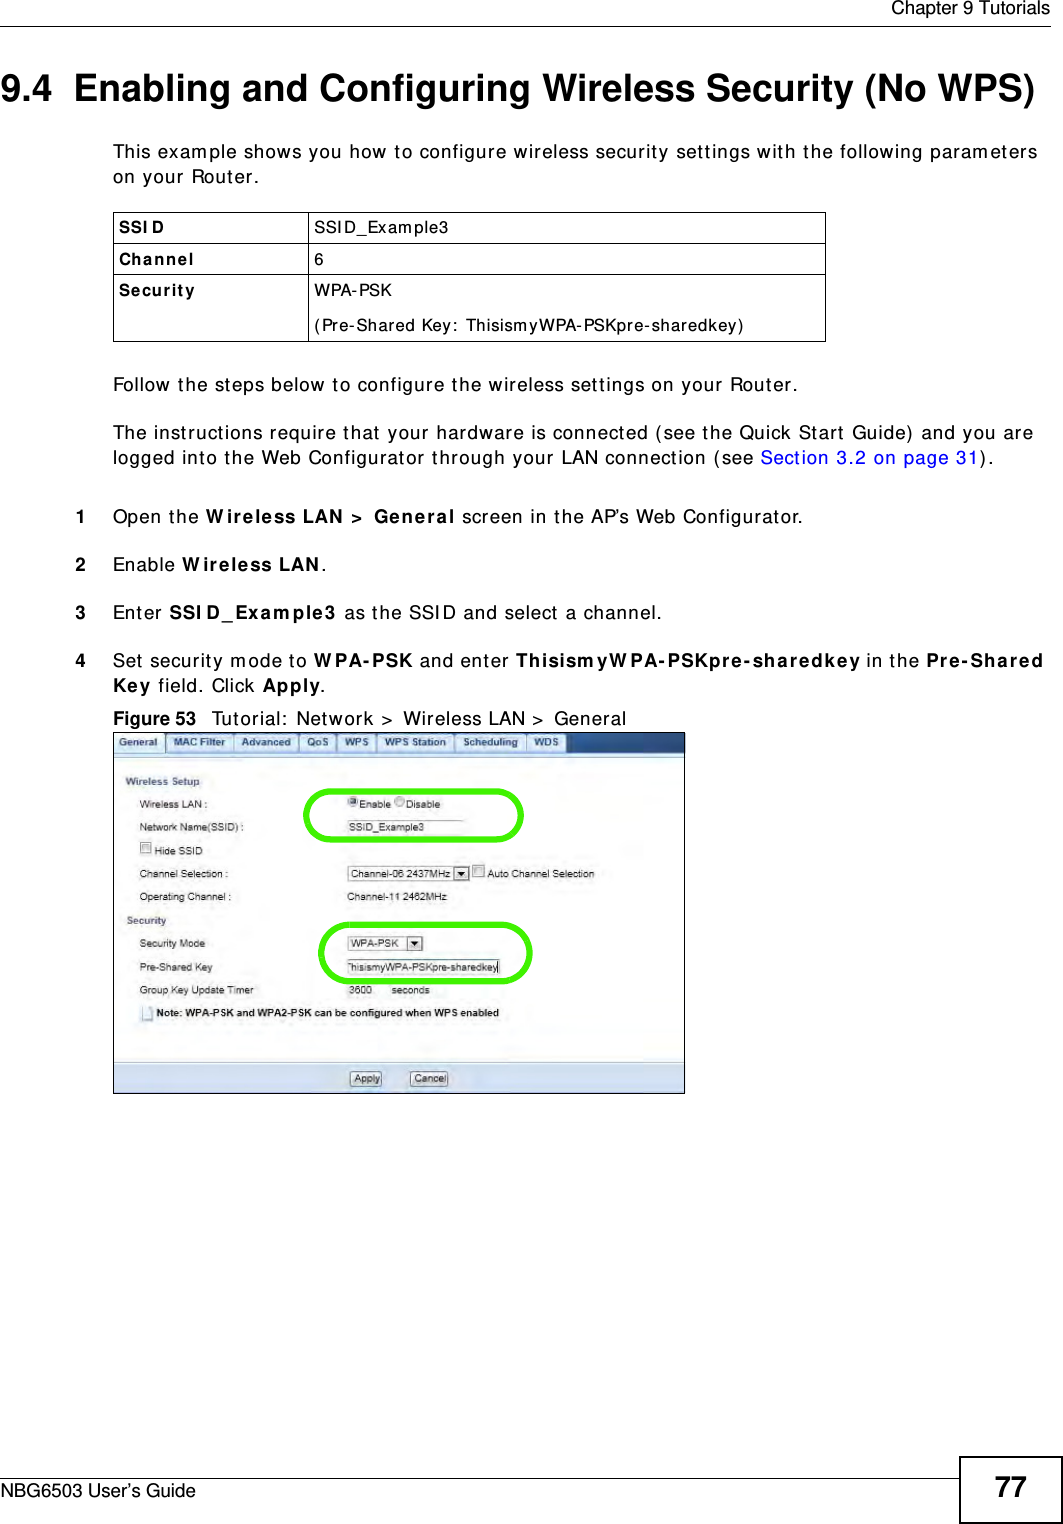  Chapter 9 TutorialsNBG6503 User’s Guide 779.4  Enabling and Configuring Wireless Security (No WPS)This example shows you how to configure wireless security settings with the following parameters on your Router.Follow the steps below to configure the wireless settings on your Router.The instructions require that your hardware is connected (see the Quick Start Guide) and you are logged into the Web Configurator through your LAN connection (see Section 3.2 on page 31).1Open the Wireless LAN &gt; General screen in the AP’s Web Configurator.2Enable Wireless LAN.3Enter SSID_Example3 as the SSID and select a channel.4Set security mode to WPA-PSK and enter ThisismyWPA-PSKpre-sharedkey in the Pre-Shared Key field. Click Apply.Figure 53   Tutorial: Network &gt; Wireless LAN &gt; GeneralSSID SSID_Example3Channel 6Security  WPA-PSK(Pre-Shared Key: ThisismyWPA-PSKpre-sharedkey)